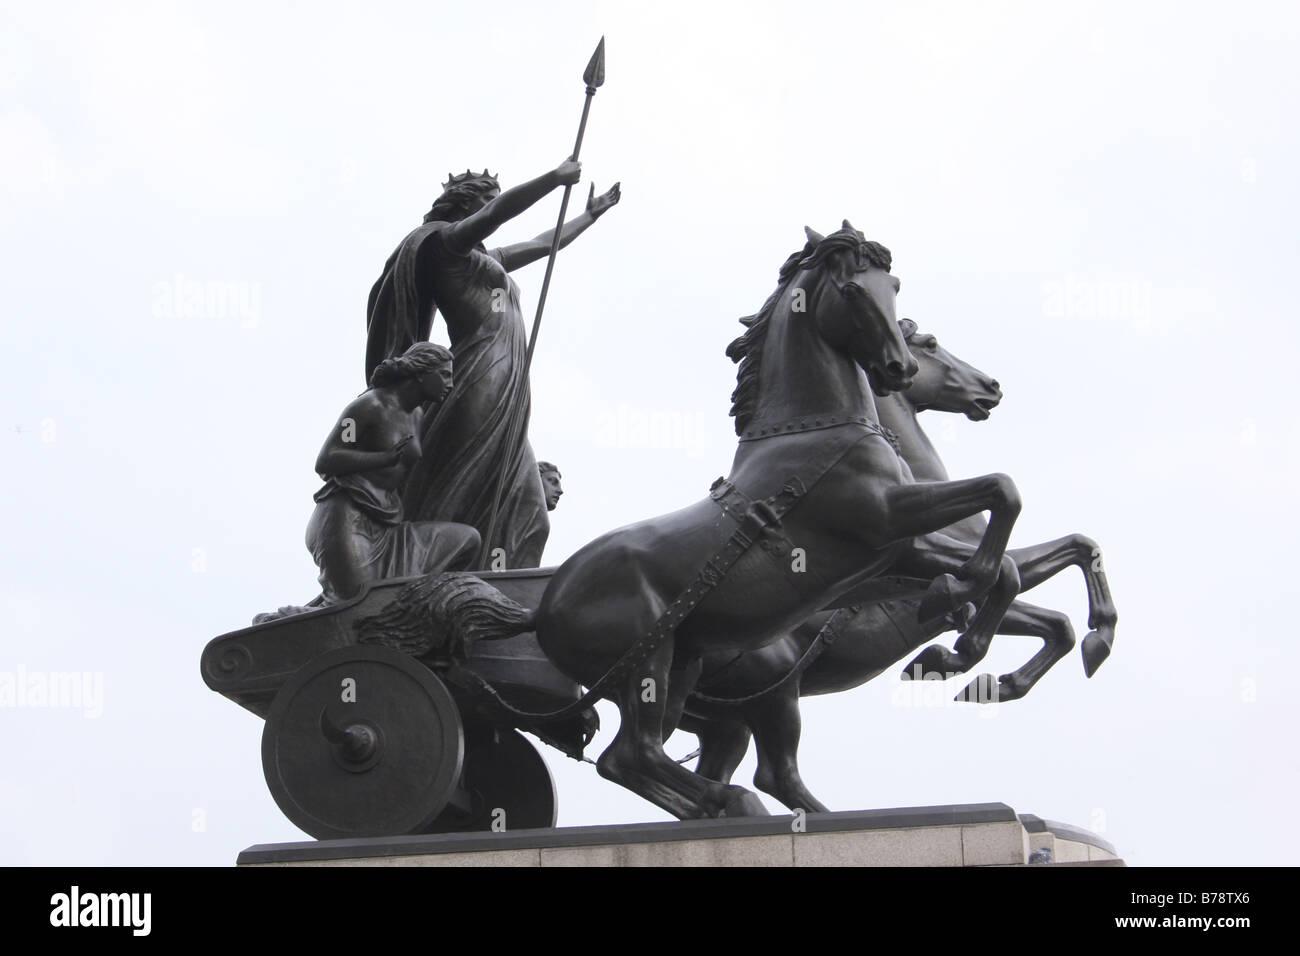 Statue by Thomas Thornycroft, standing near Westminster Pier, London of Boudica the warrior Queen. Stock Photo